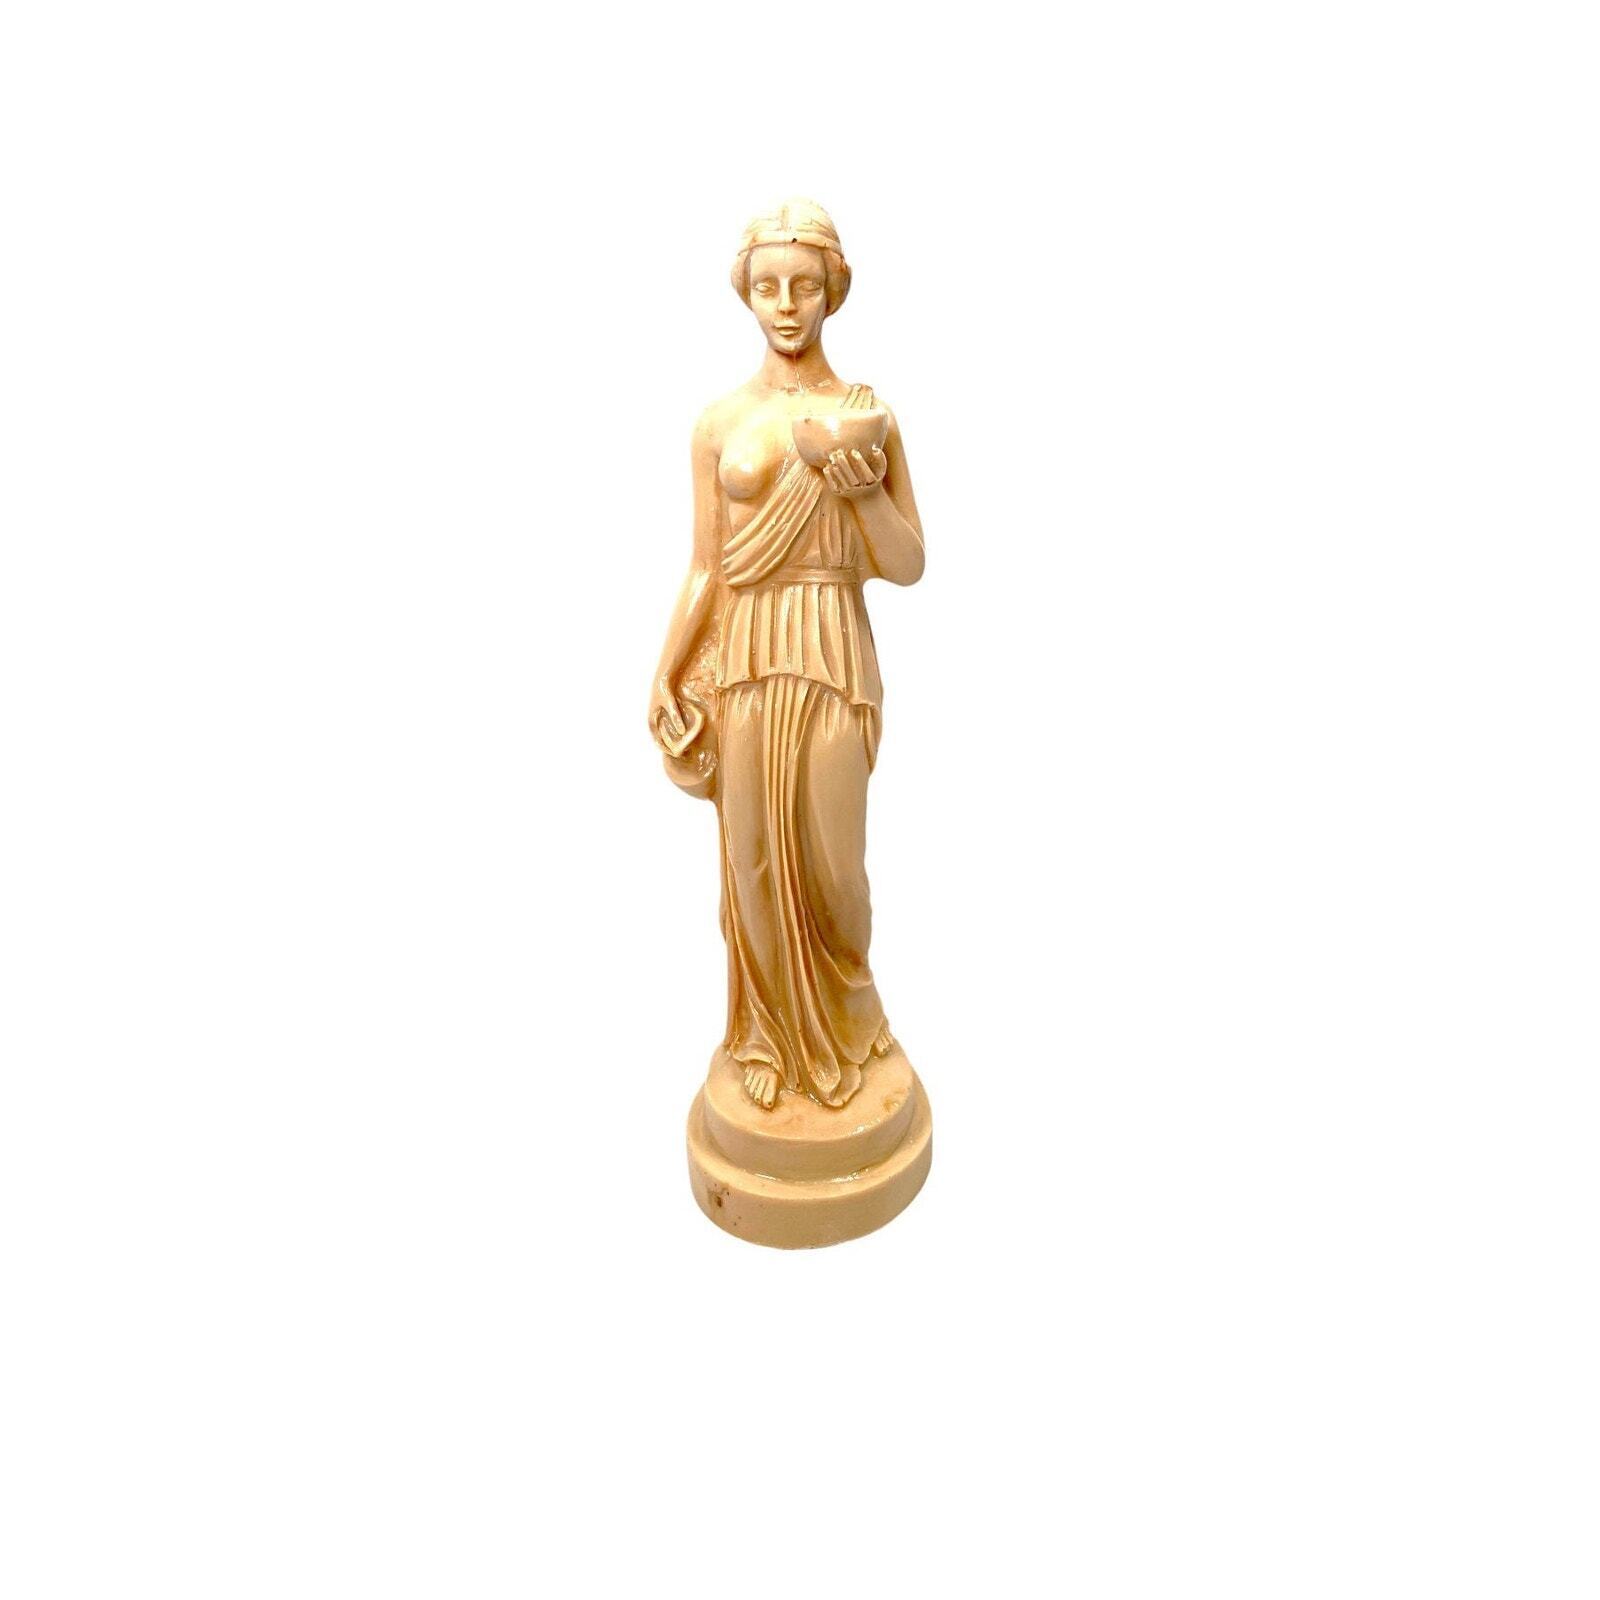 Vintage Italian Sculpture of Hebe the Goddess of Youth